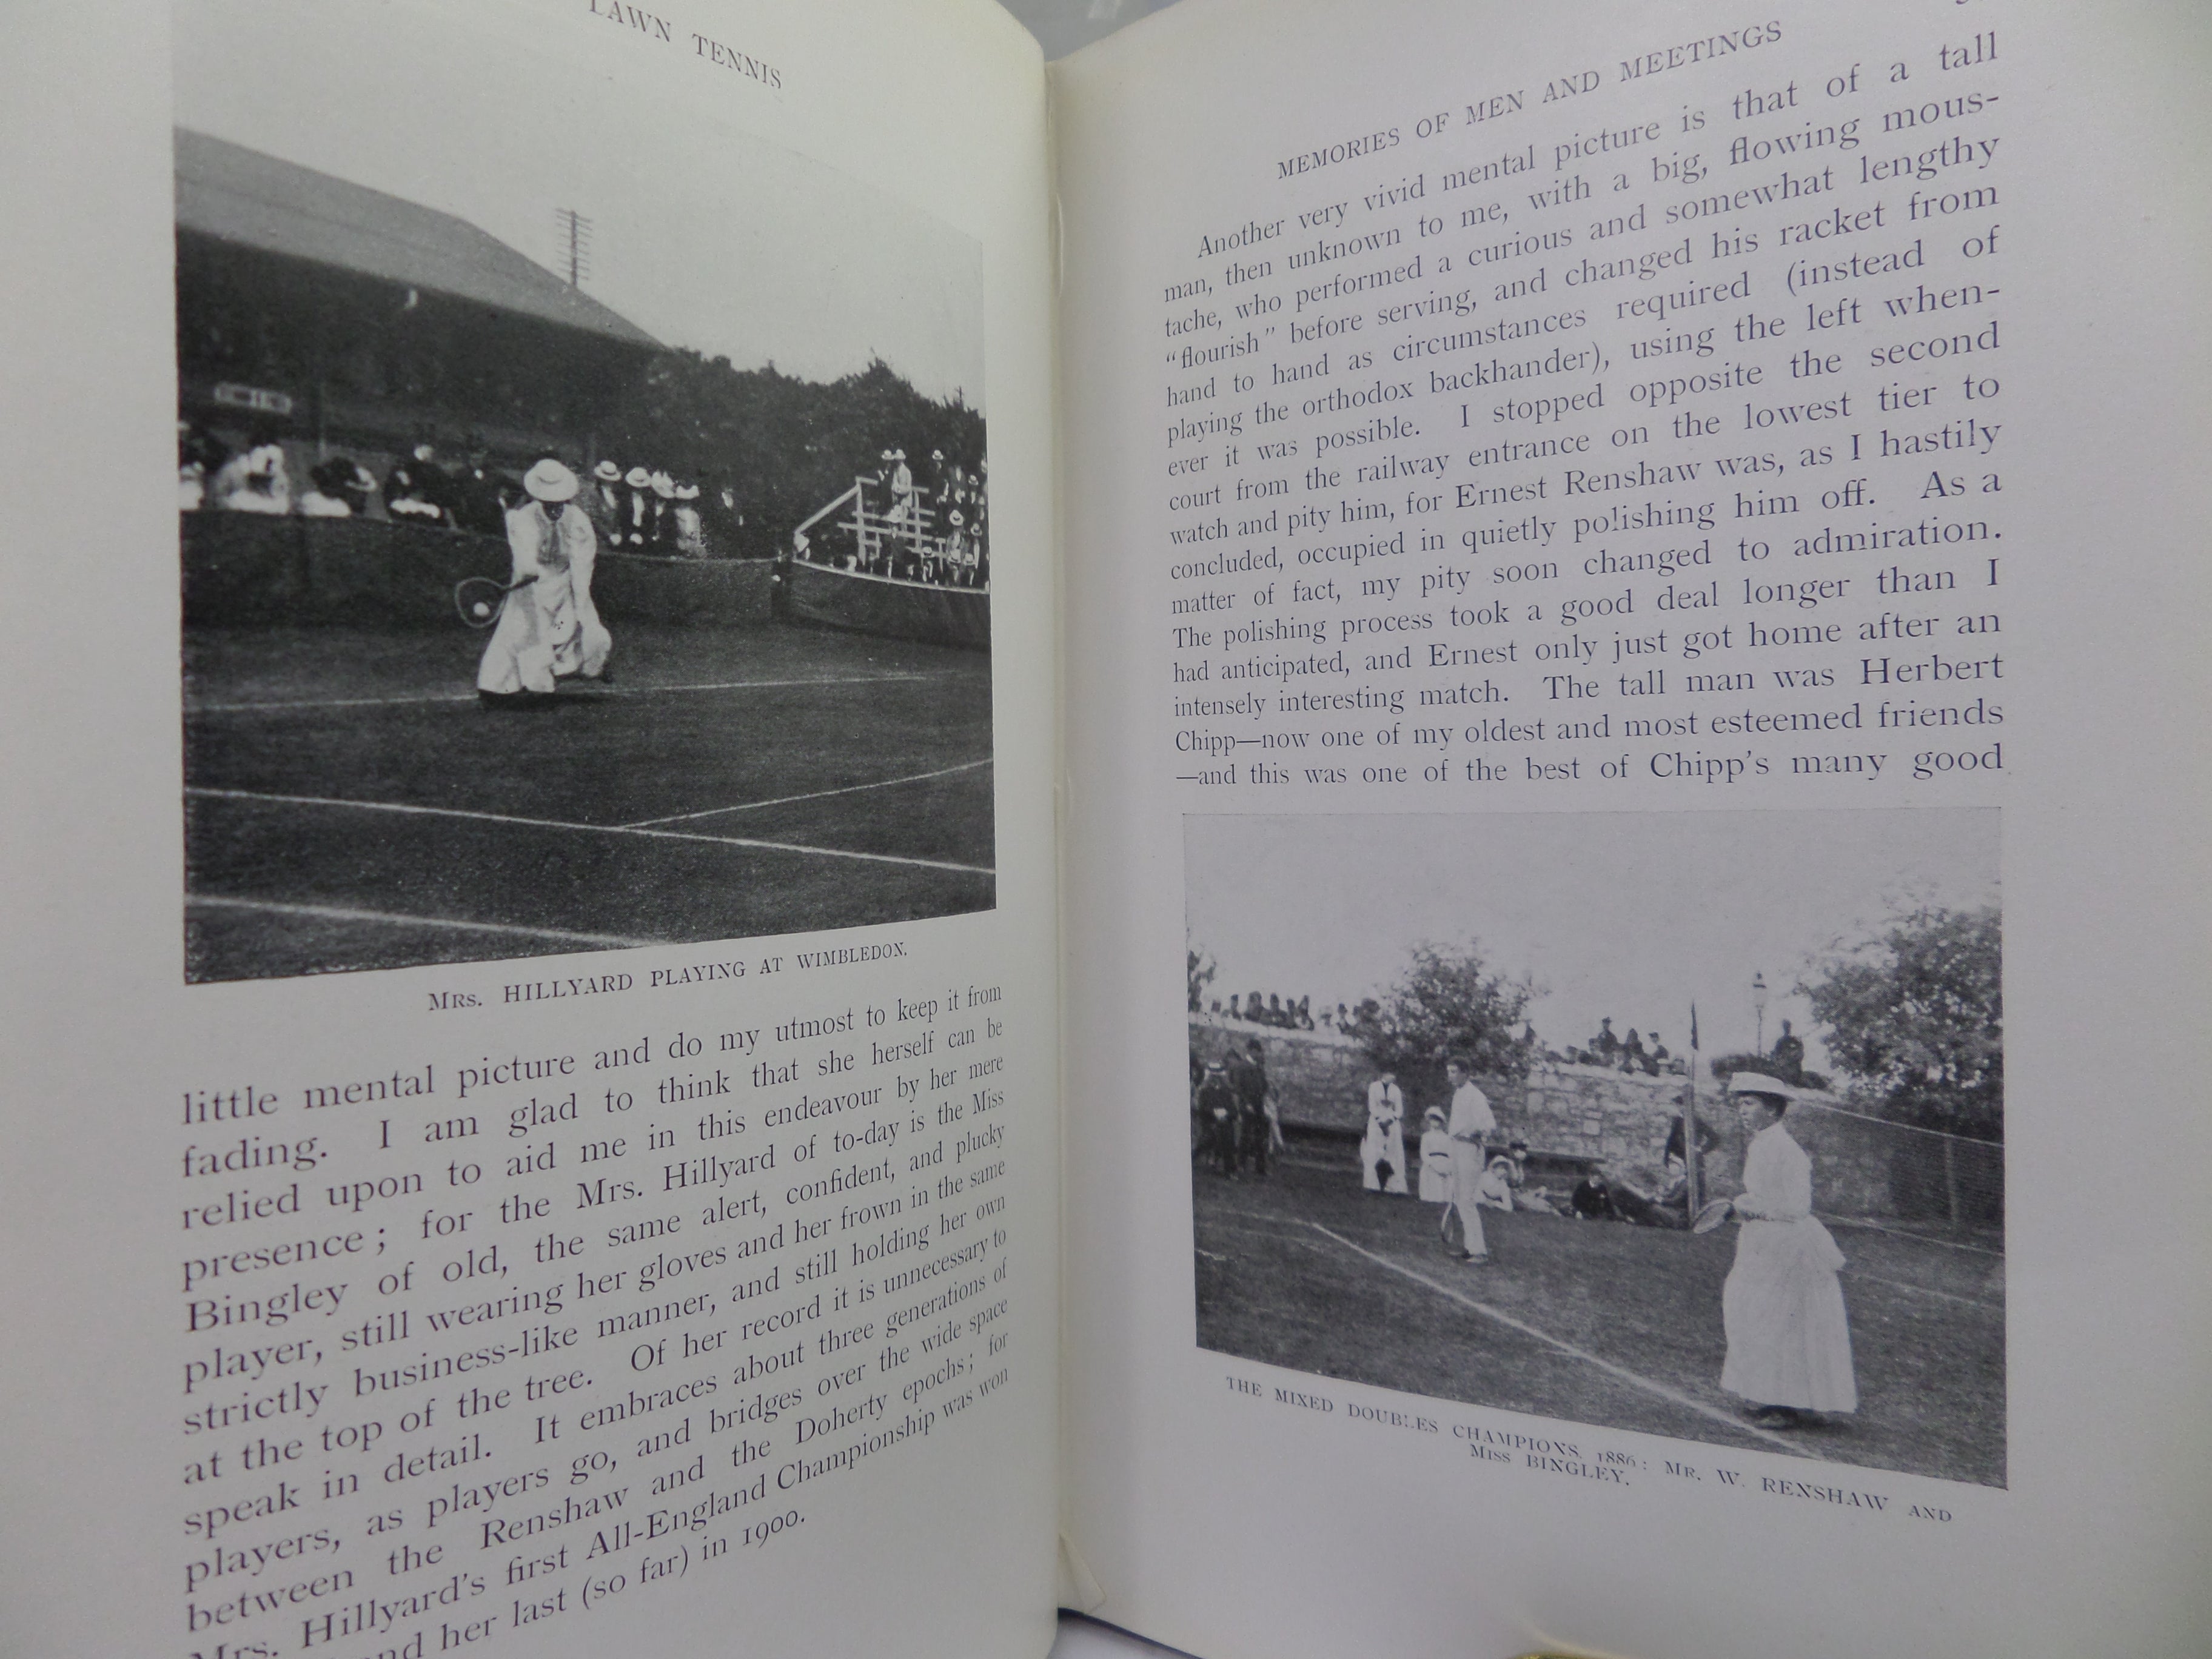 LAWN TENNIS AT HOME AND ABROAD BY A. WALLIS MYERS 1903 FIRST EDITION